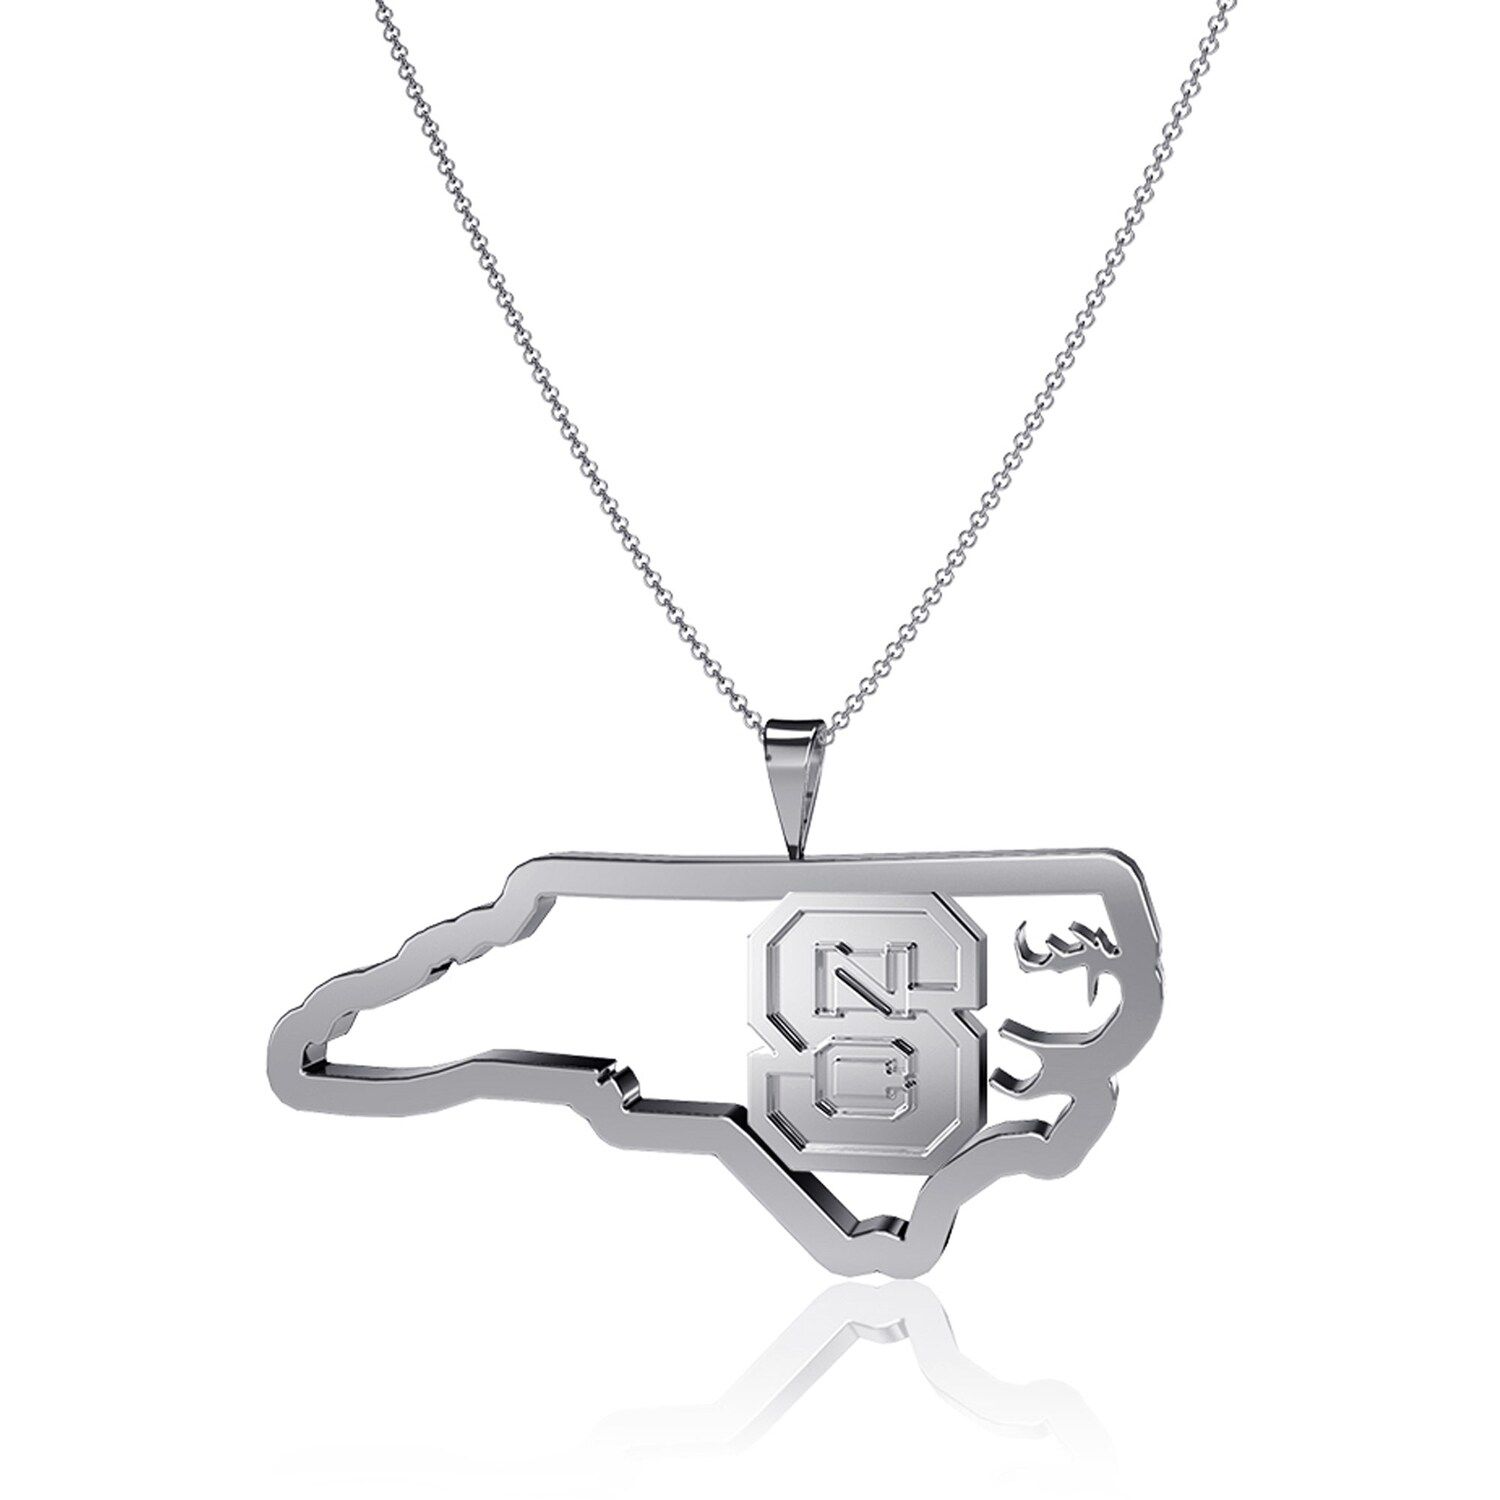 Image for Unbranded Dayna Designs NC State Wolfpack Team State Outline Necklace at Kohl's.